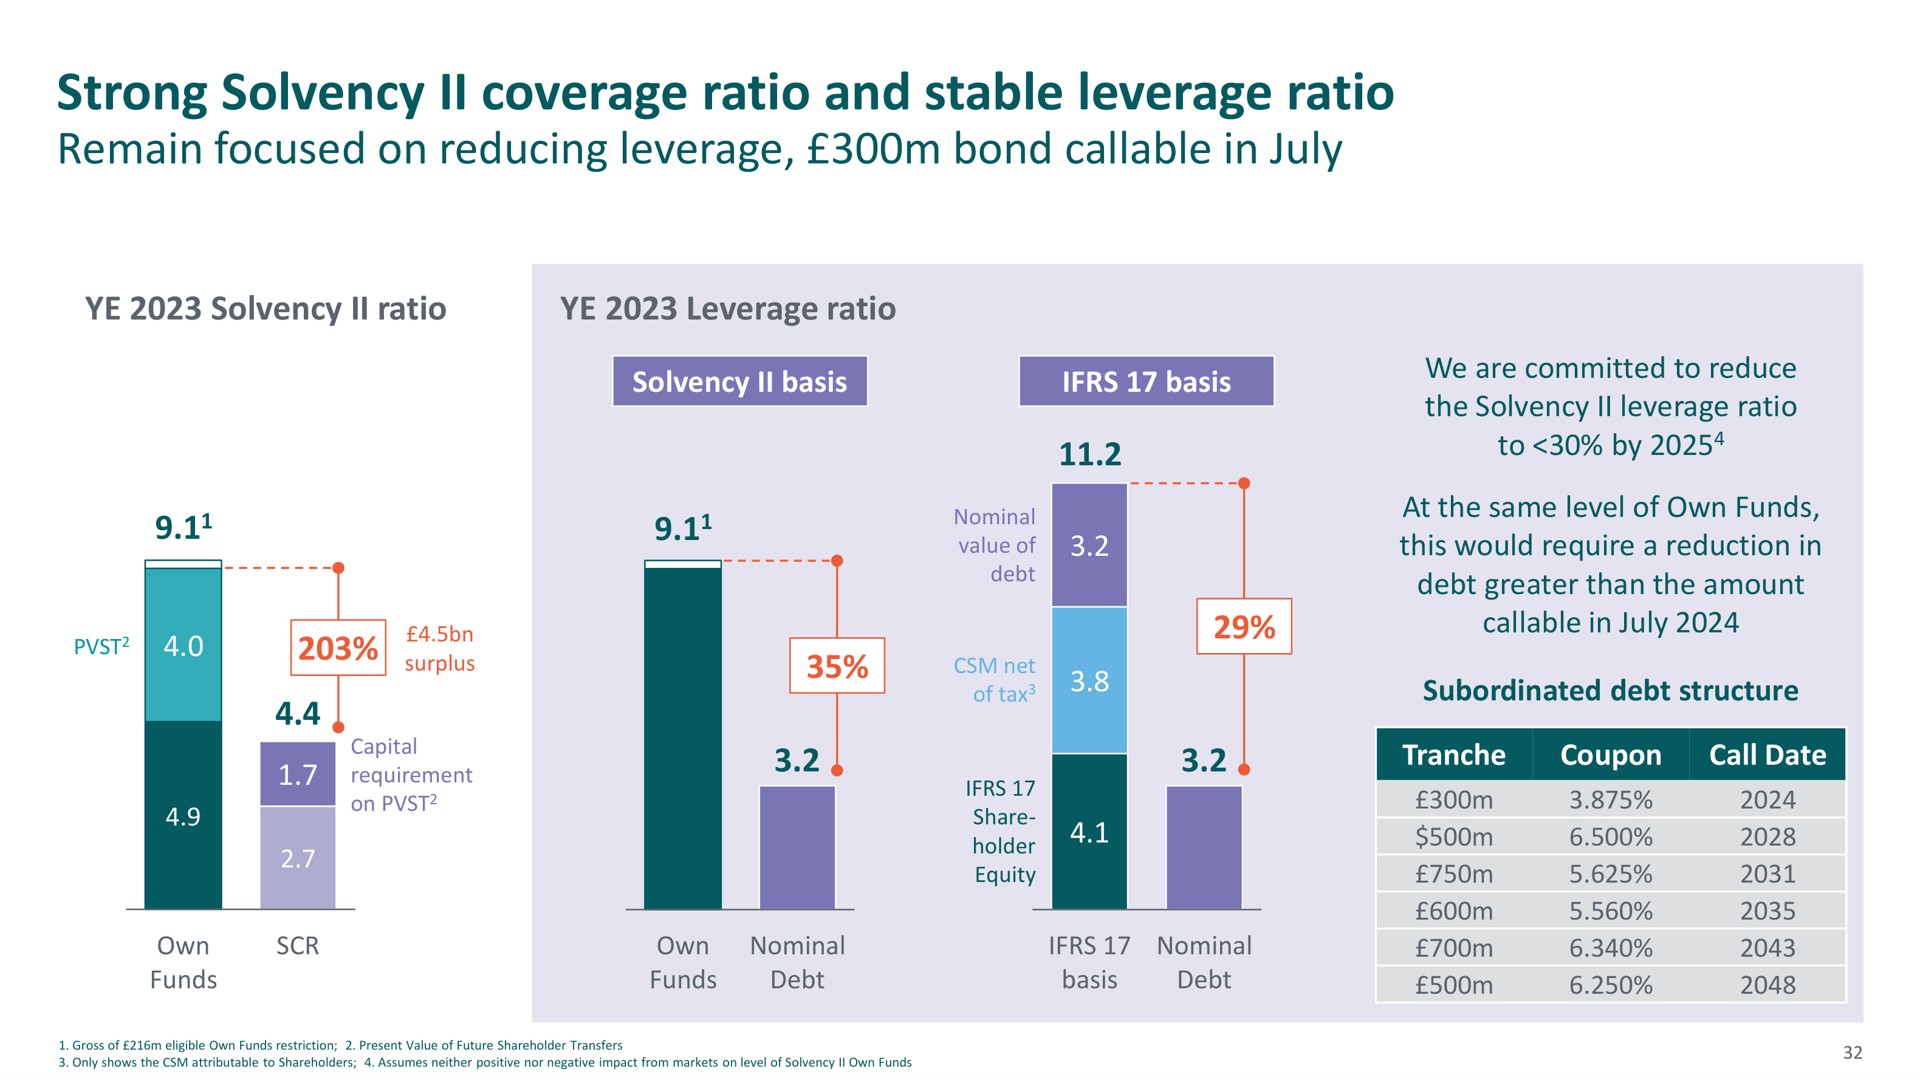 strong solvency coverage ratio and stable leverage ratio | M&G